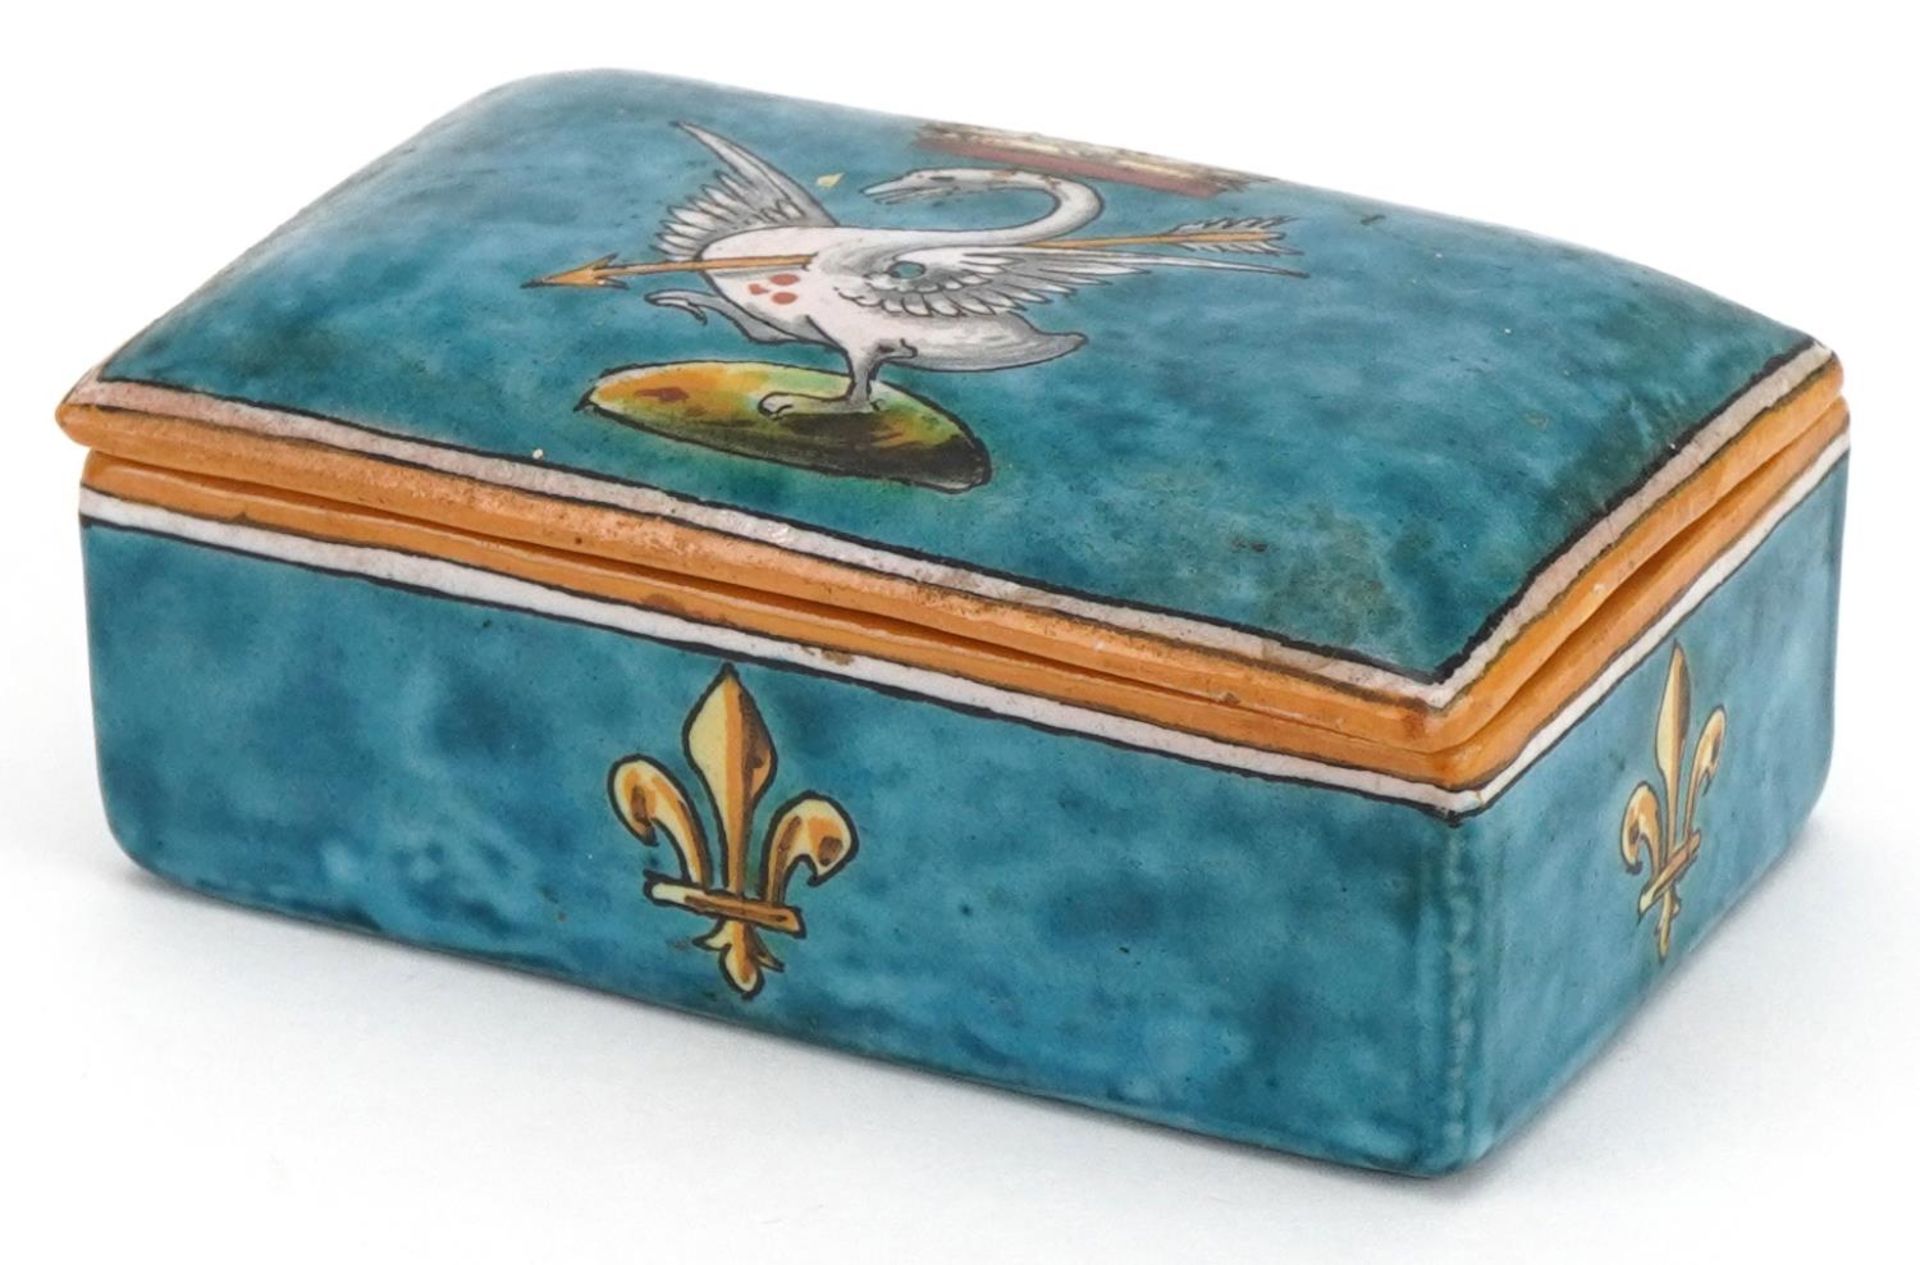 Ulysse Blois, 19th century French faience glazed pottery box and cover hand painted with fleur de - Image 2 of 8